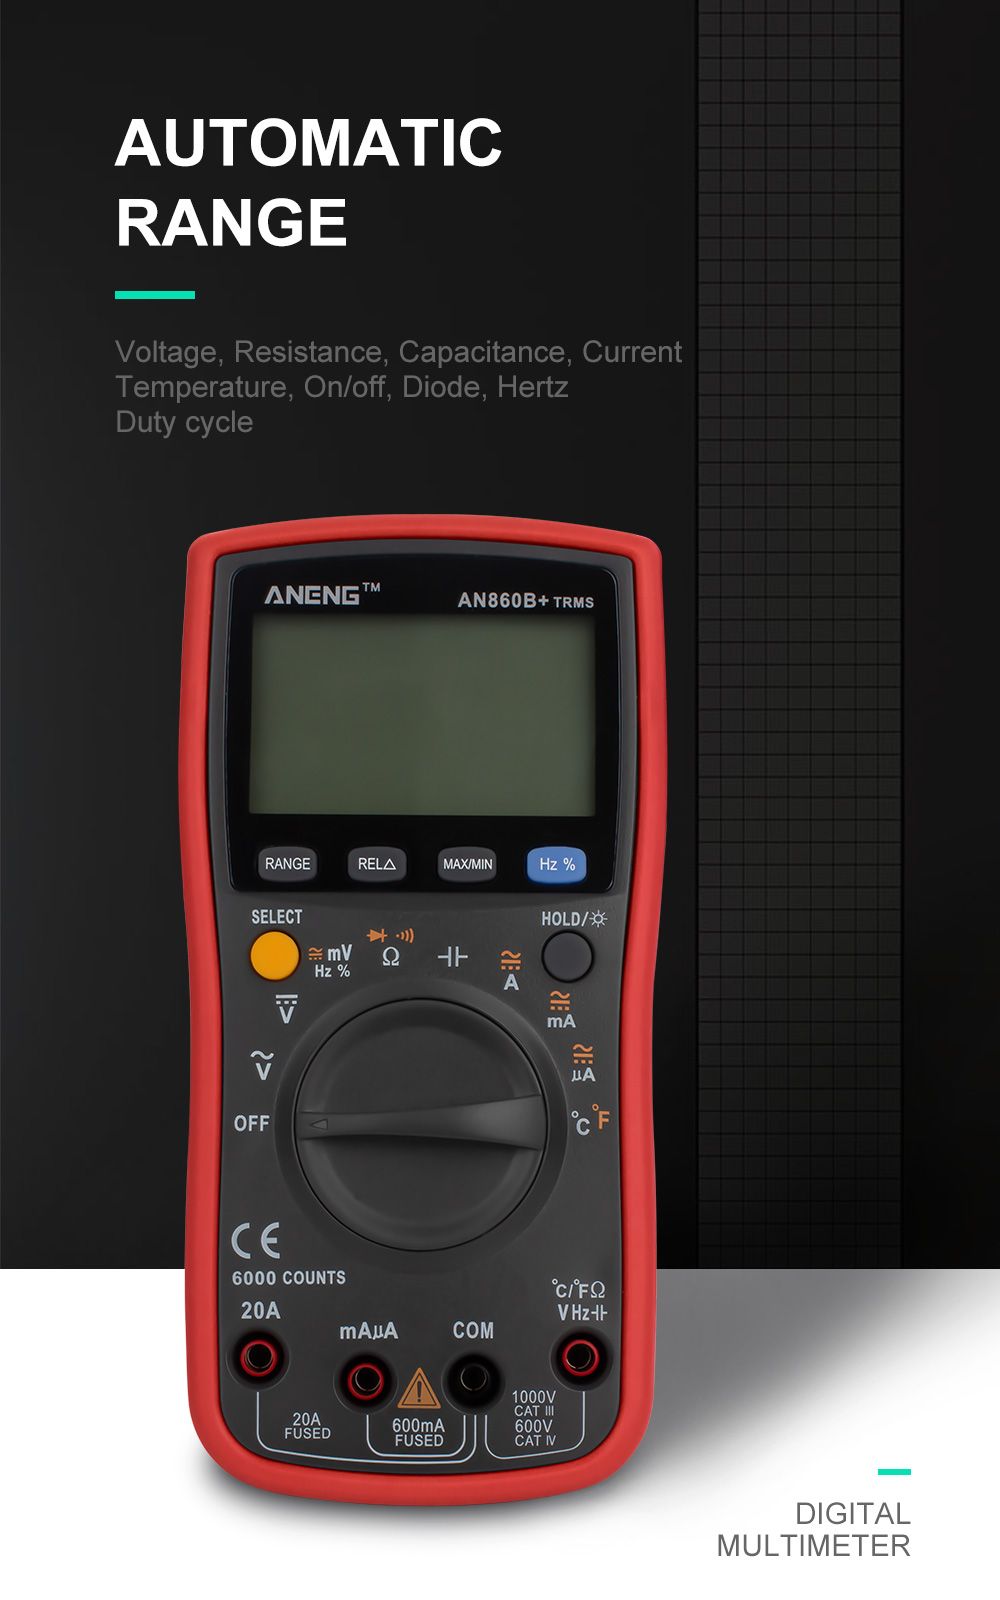 ANENG-AN860B-LCD-6000-Counts-Digital-Multimeter-Backlight-ACDC-Current-Voltage-Resistance-Frequency--1451301